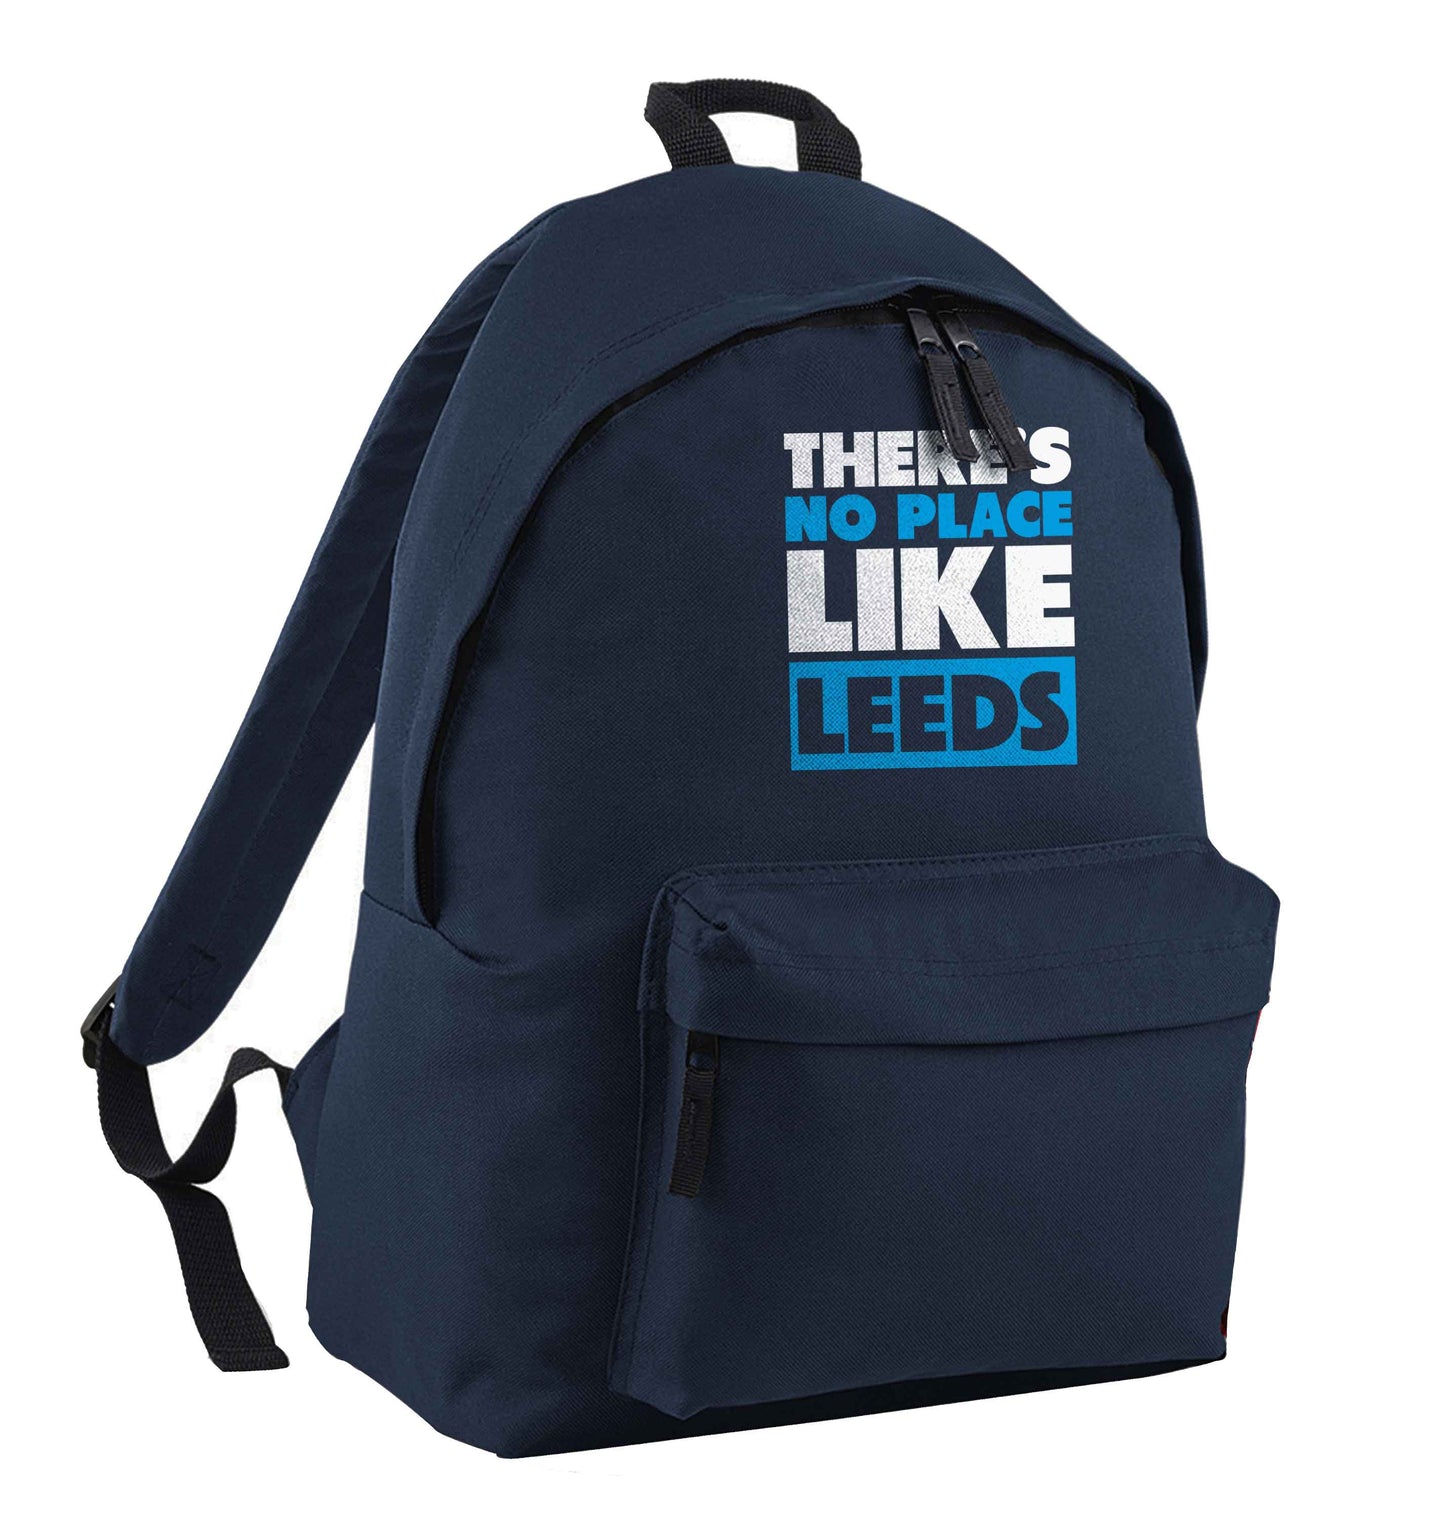 There's no place like Leeds navy children's backpack